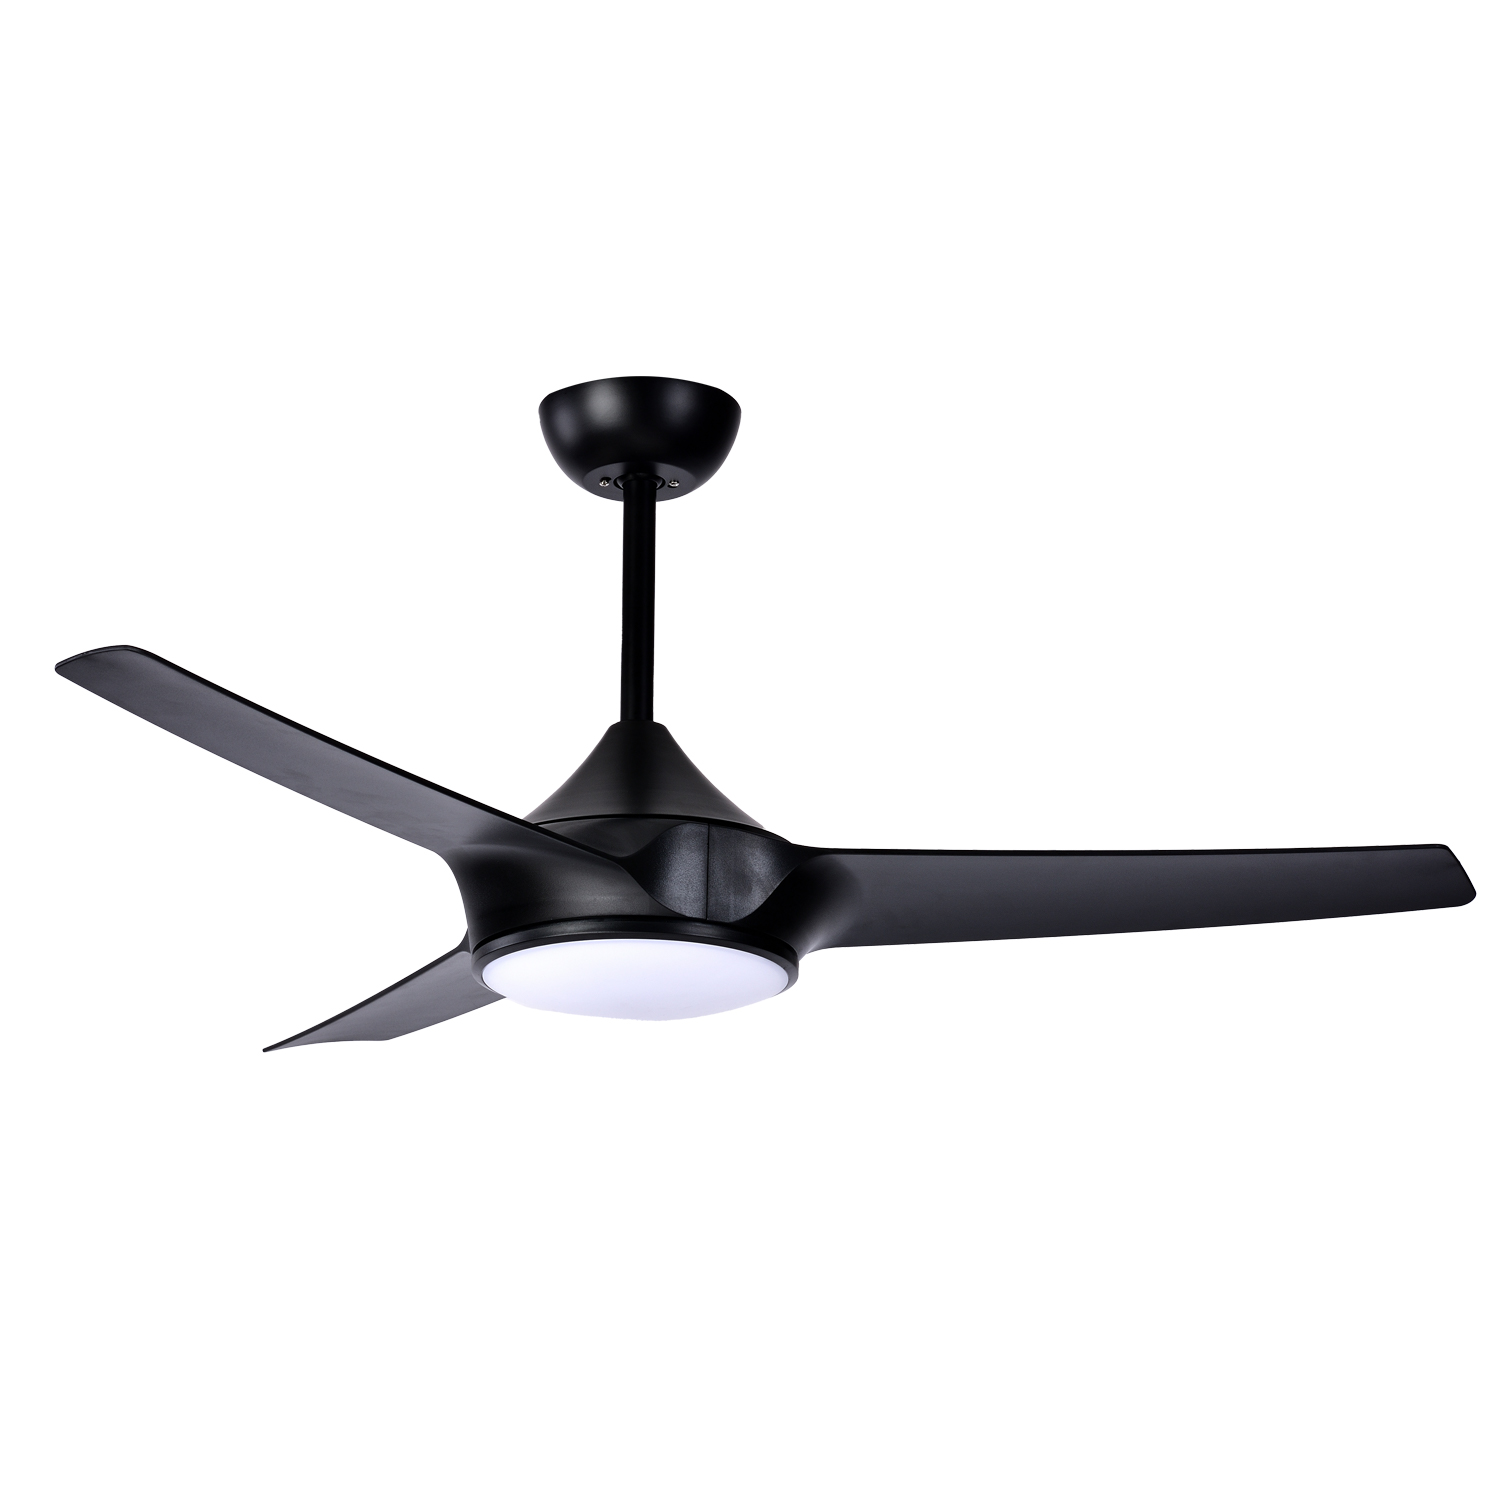 Modern 220 Volts 3 ABS Blades Ceiling Light and Fan Remote Control Dc Bldc Ceiling Fans Cooling